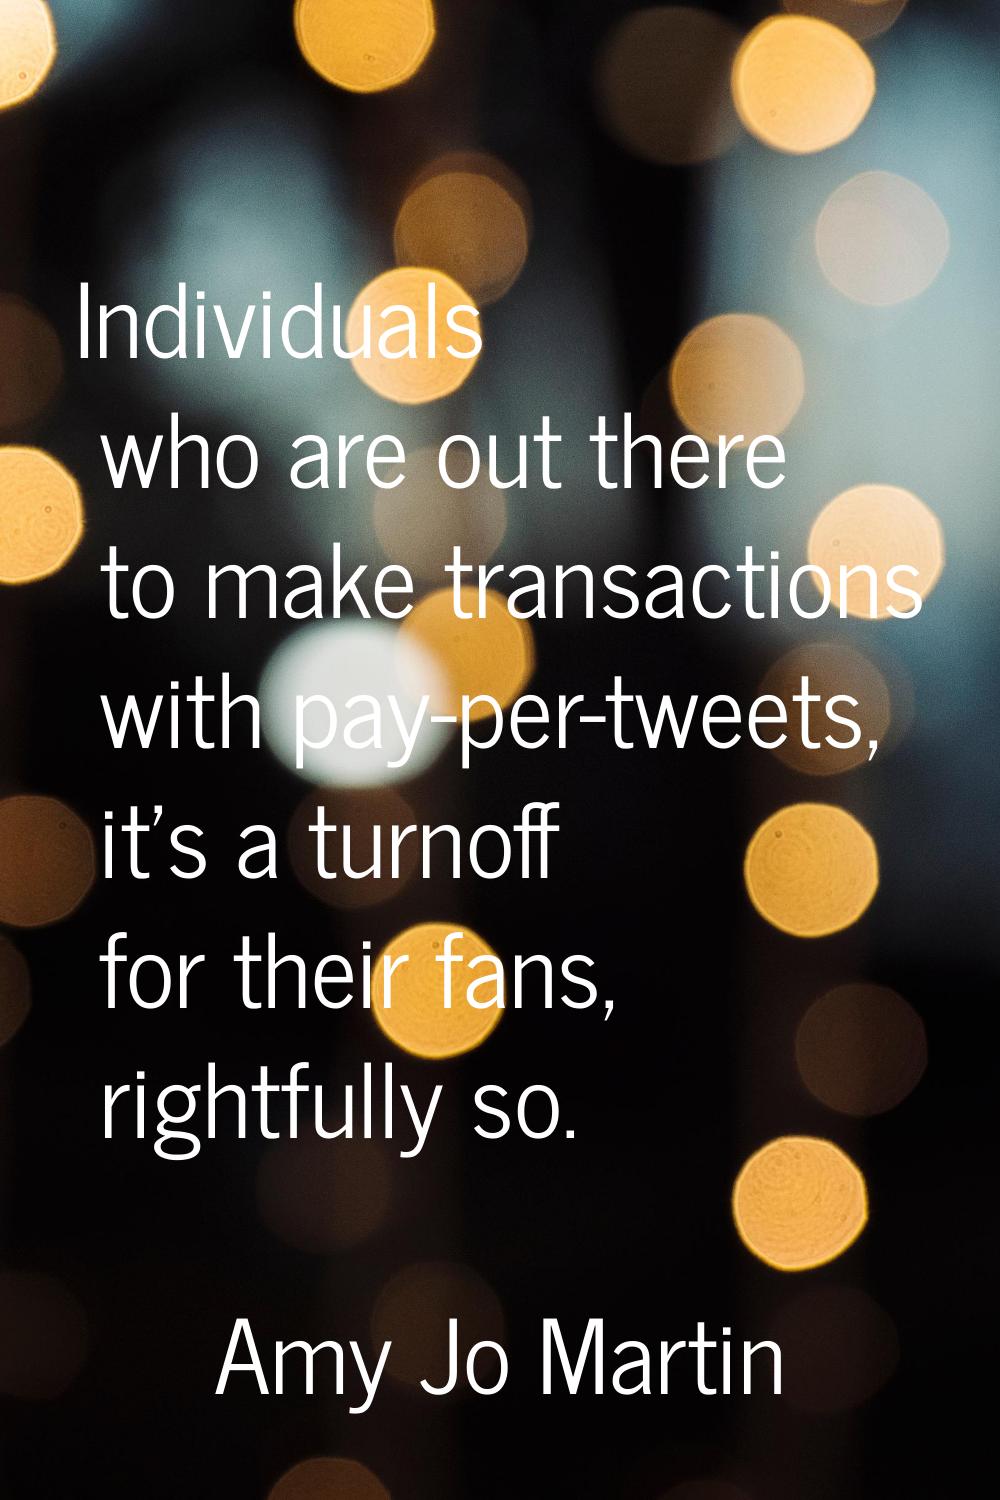 Individuals who are out there to make transactions with pay-per-tweets, it's a turnoff for their fa